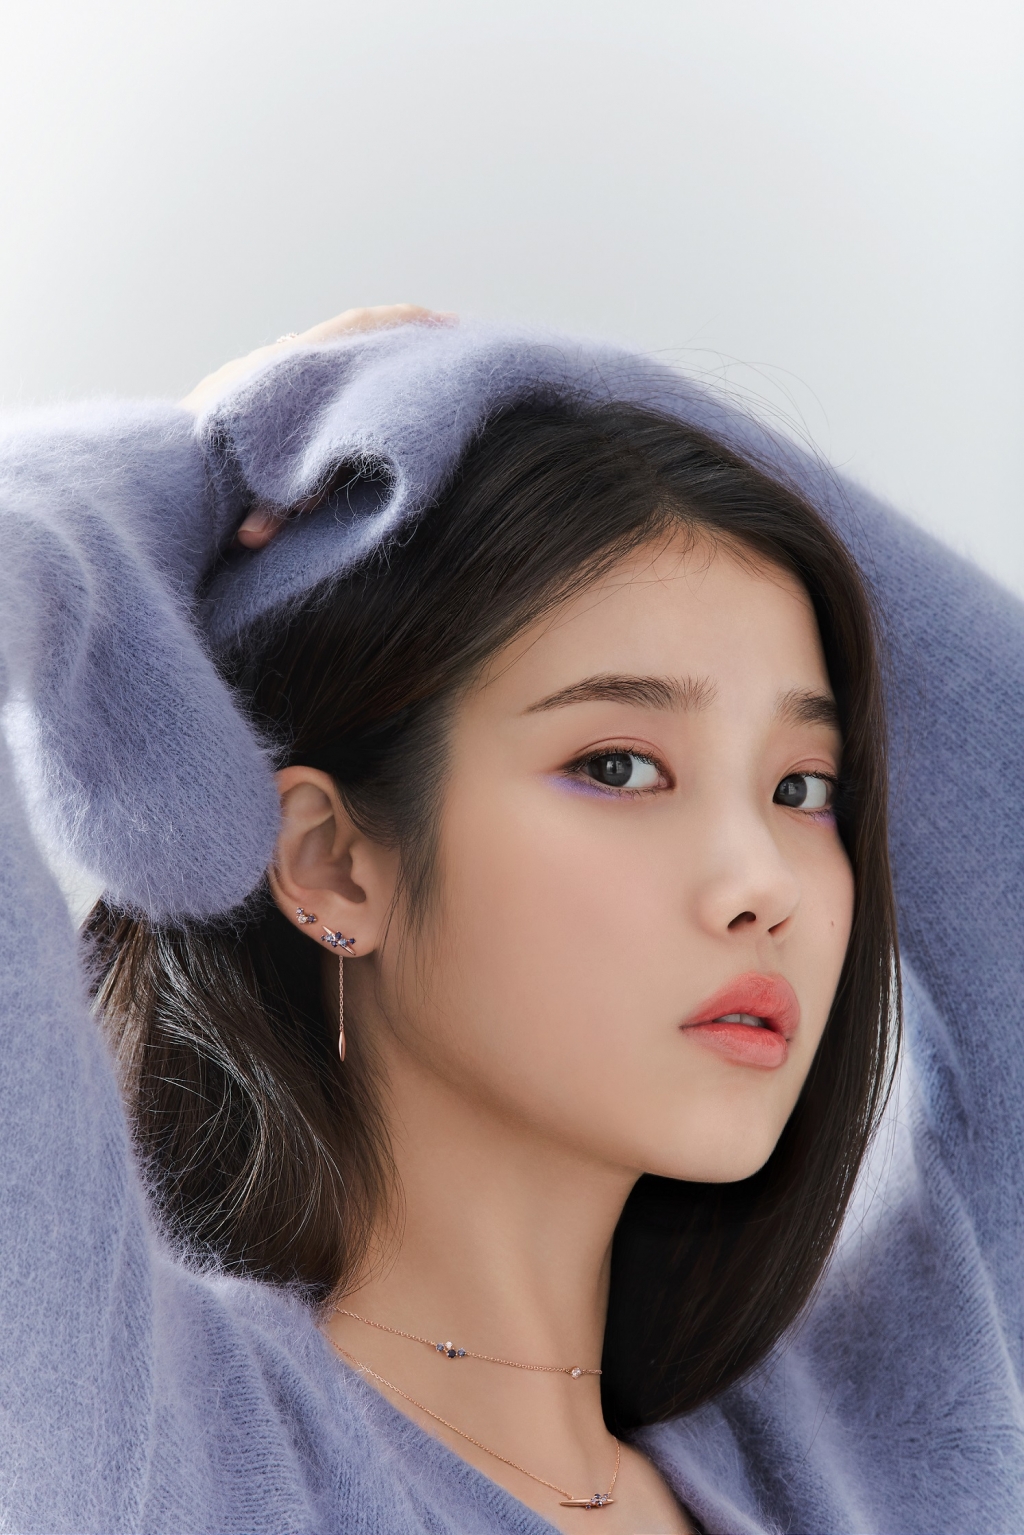 Singer IU presented a picture of a dignified and charismatic atmosphere.Global luxury brand J. Estina (J.ESTINA) unveiled its 2020 Autumn Advertising Campaign with Muse IU (IU) on Monday.This seasons advertising campaign I J. Estina You (I J.ESTINA U) portrayed a trendy, changed brand image through the Model IU, like a brand symbol that was renewed last year.The IU in the public picture showed a more mature and dignified appearance from the existing pure and lovely image.Wearing a chic black jacket, IU created a mysterious atmosphere with a casual look and a point eye makeup that was pink under the eyes.The Dream COIN (DREAM COIN) necklace worn by the IU is a collection of Jay Ete (J ete).On the back of the COIN pendant, Tiara, a symbol of good fortune, was imprinted and it had a special meaning of supporting your dream.IU, which was worn with a chic black jacket and pants and black high heels, gave off charisma with an all-Black look.Here, IU matched jewelery using Brand initials, showing luxurious yet elegant charm.In another pictorial IU boldly pulled back a refreshing denim jacket, revealing a slender neckline.IU is a back door that has completely digested the shooting concept with various facial expressions and professional attitudes and has impressed the field staff.The IU also boasted a unique visual, perfecting its unique Number 1 (Lavender Mist) makeup with a warm Number 1 (Lavender Mist) Angora knit.The IU, which matched dark blue stone jewelery reminiscent of the universe in a warm kite 1 (Lavender Mist) knit, showed a dreamy atmosphere at once with a languid and languid eyes.On the other hand, jewelery worn by IU in the picture can be found at J. Estina stores and official online malls nationwide.J. Estina unveils IU and I J.ESTINA U campaign pictorial...Dignified female expression